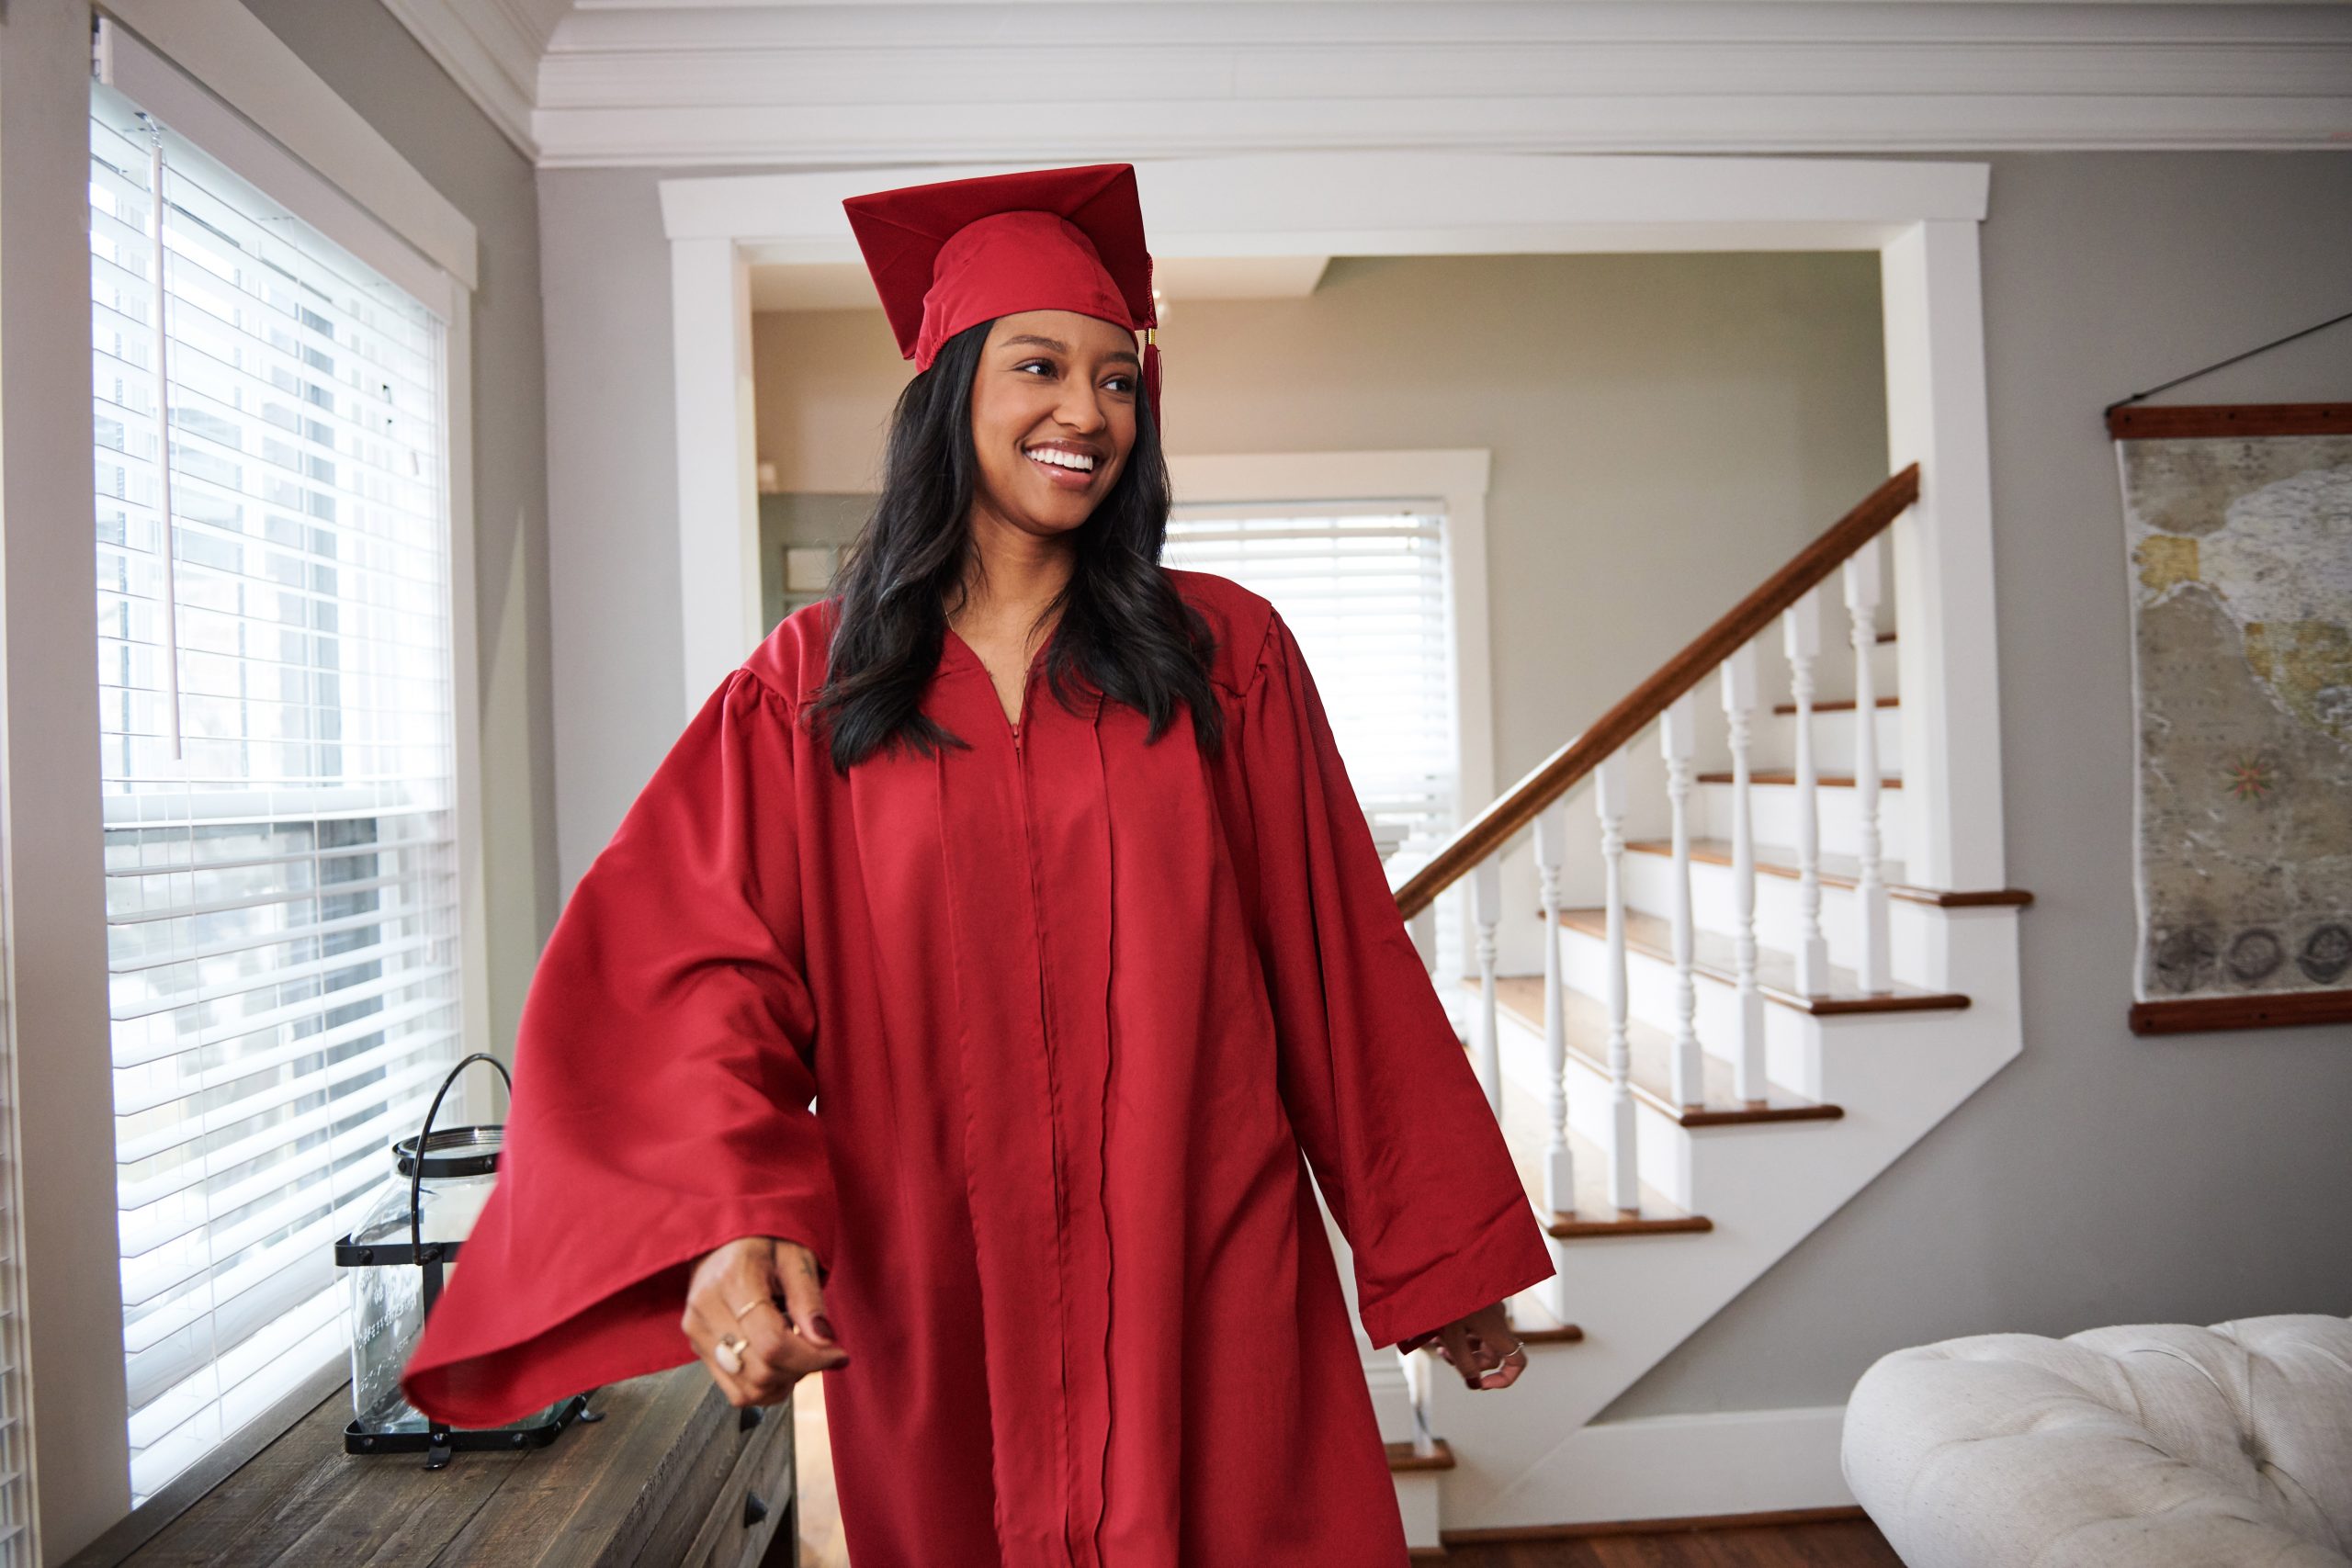 Young woman wearing red graduation cap and gown